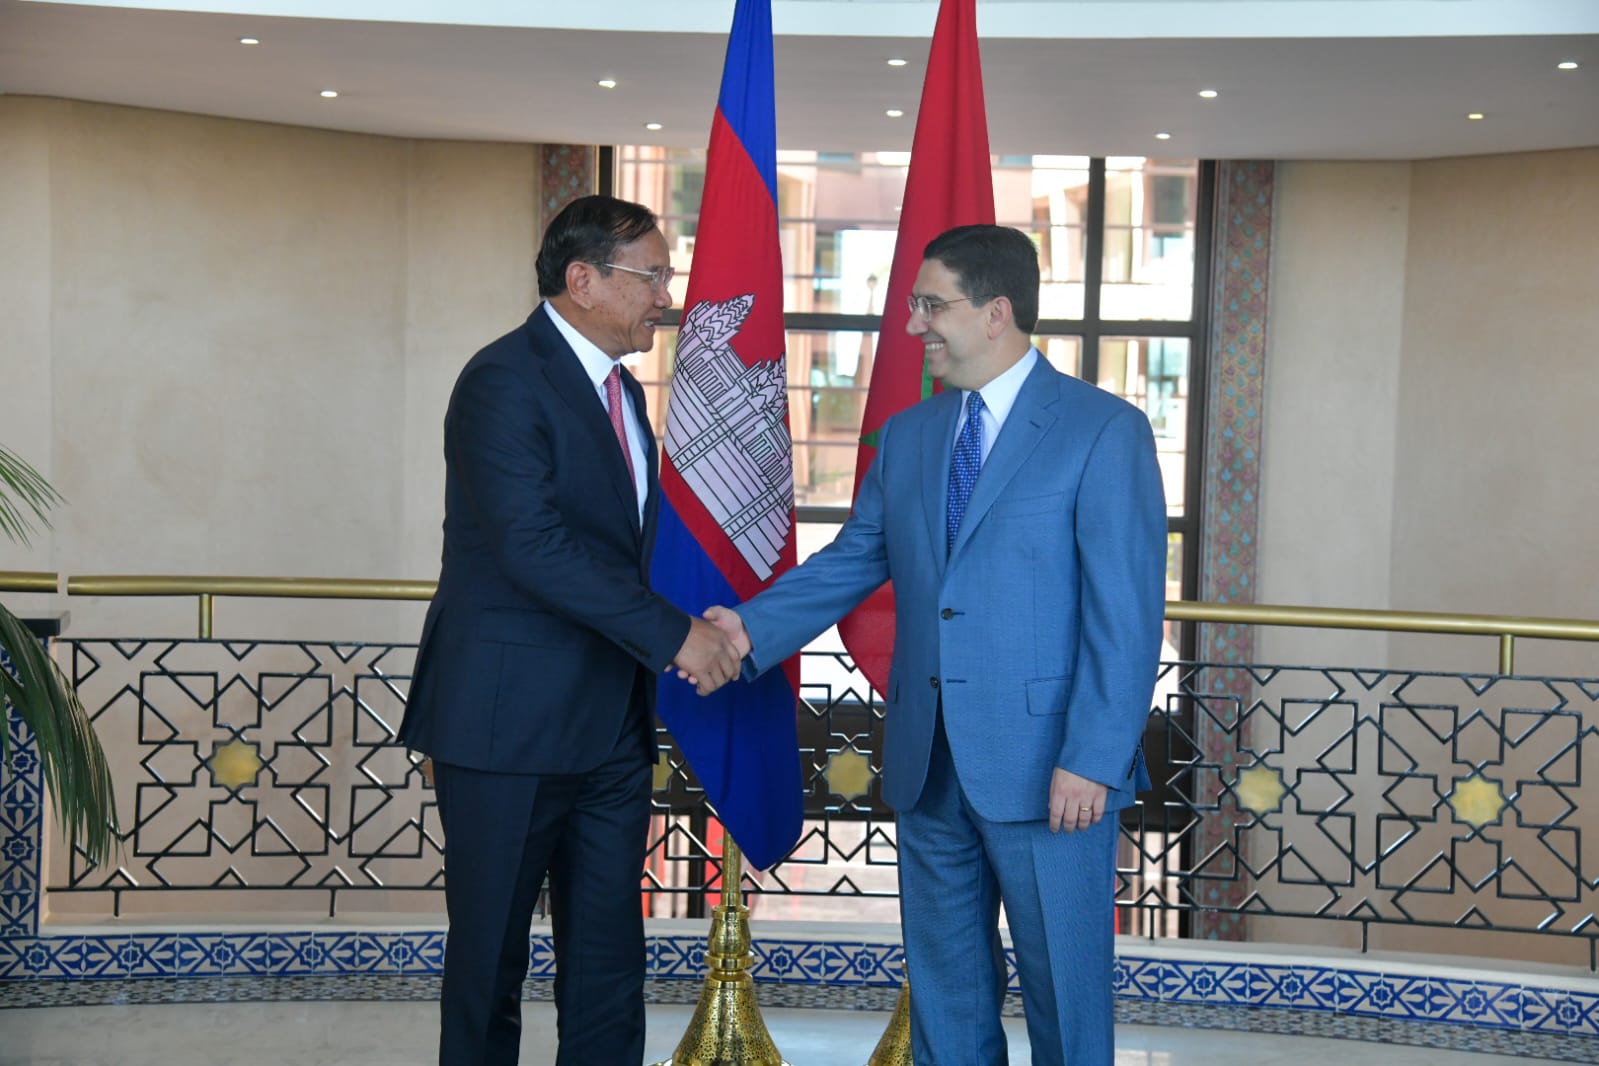 Morocco, Cambodia sign agreement on air services, other deals in the pipeline